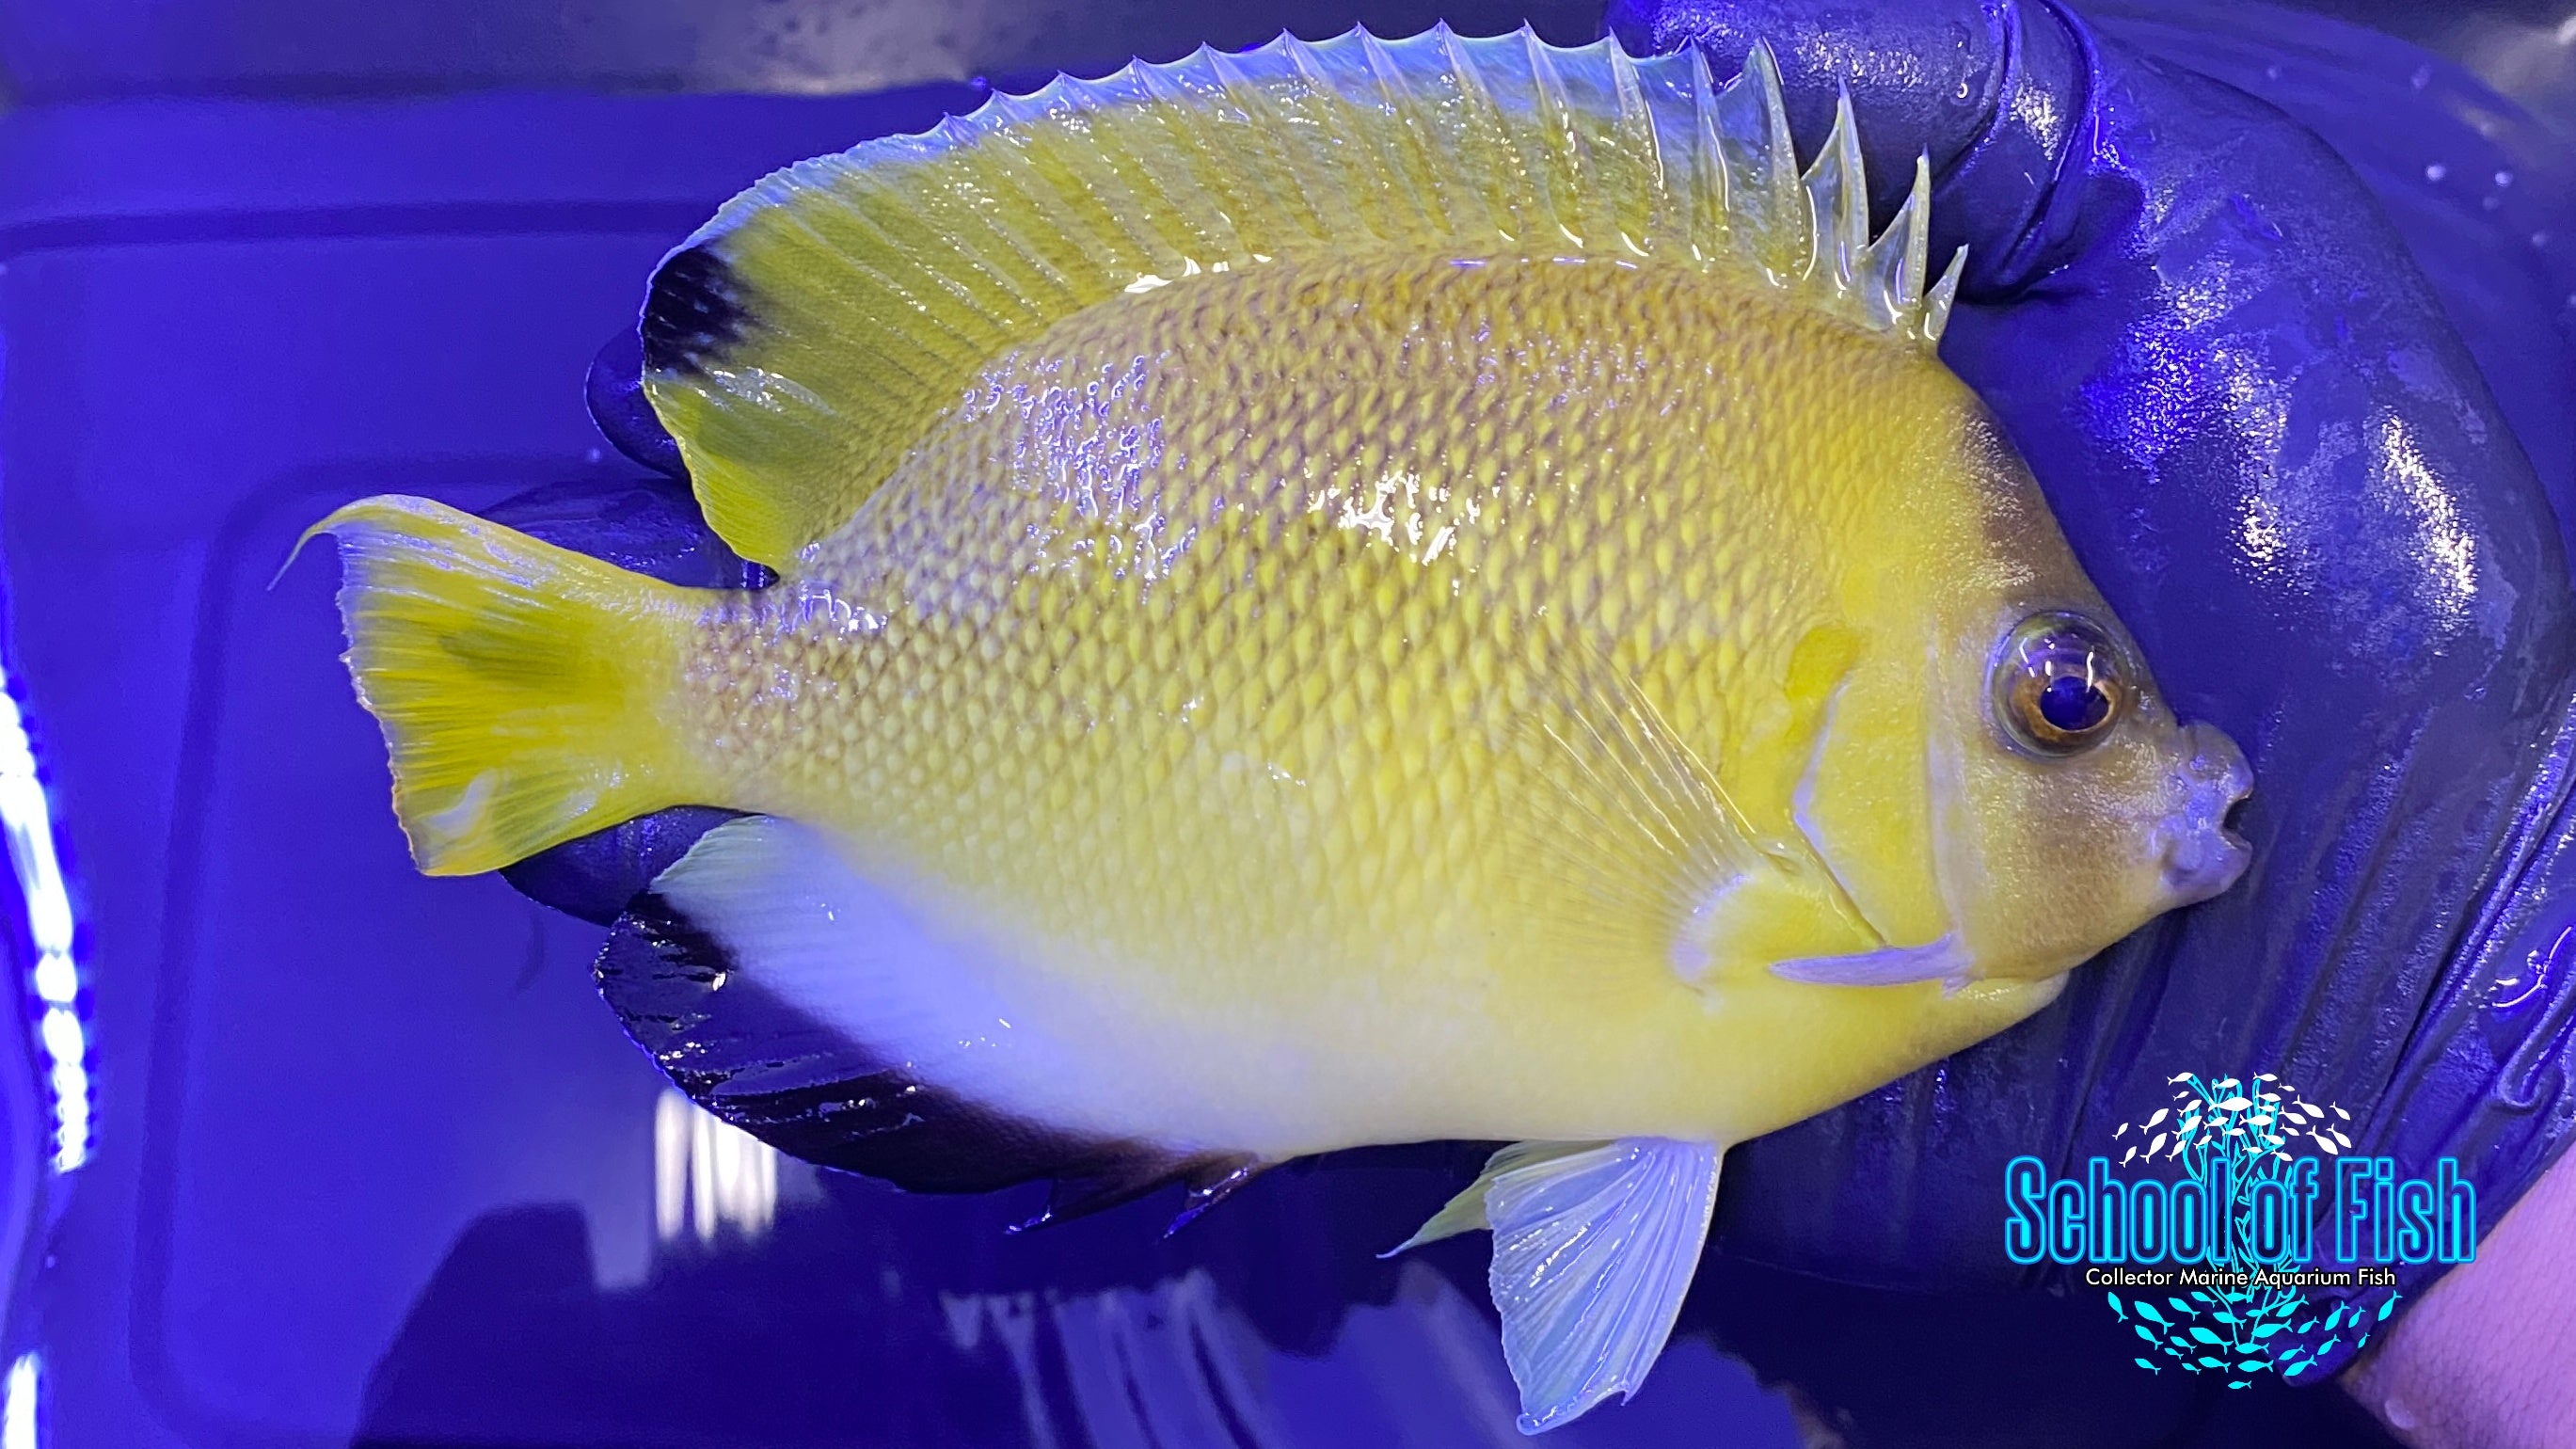 Armitage Angelfish XL (Apolemichthys armitage) is actually a hybrid of the Flagfin Angelfish and the Cream Angelfish School of Fish Online Store School of Fish Online Store